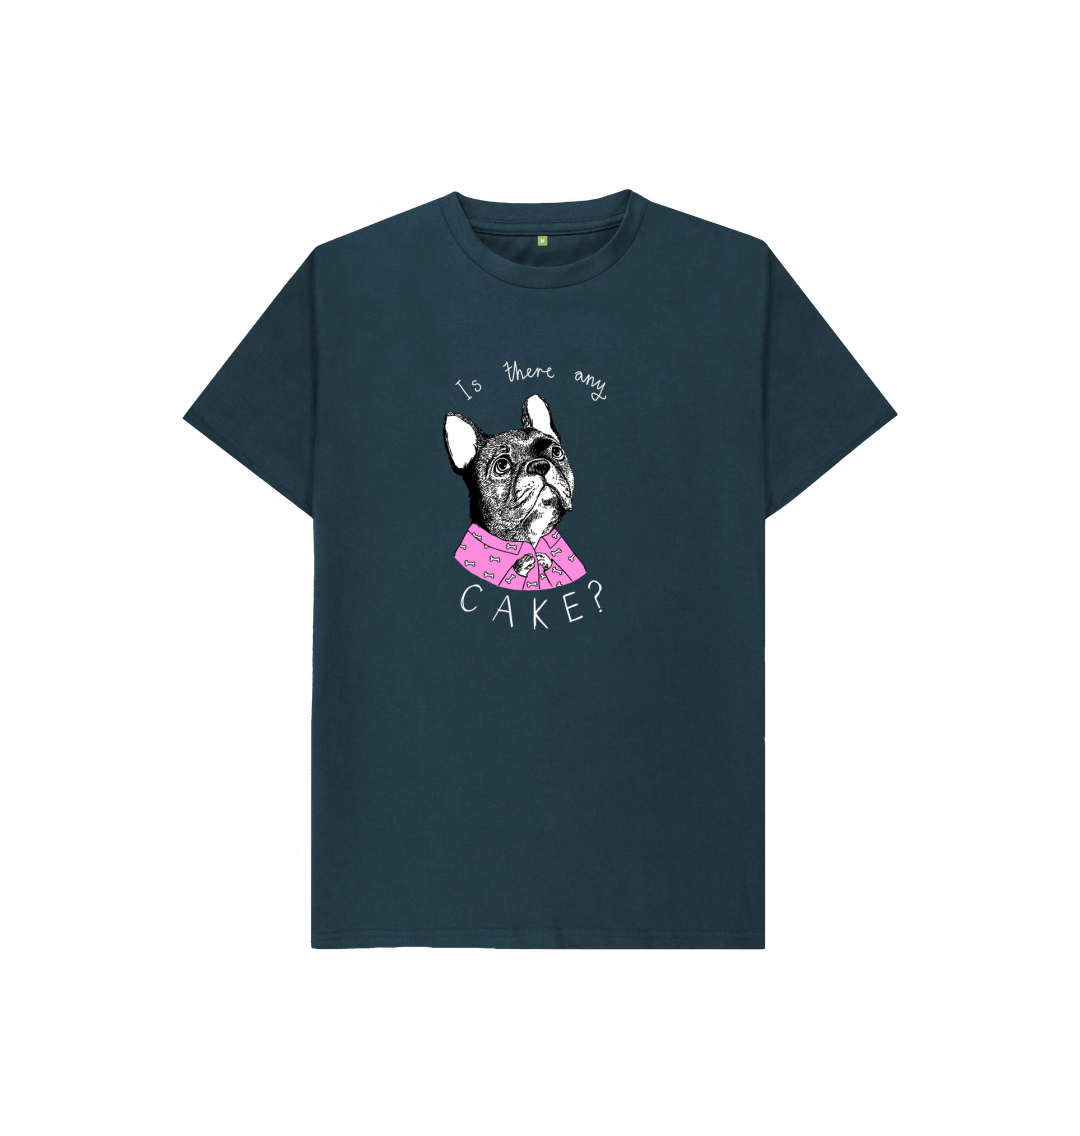 Denim Blue 'Is There Any Cake?' Kids T-shirt